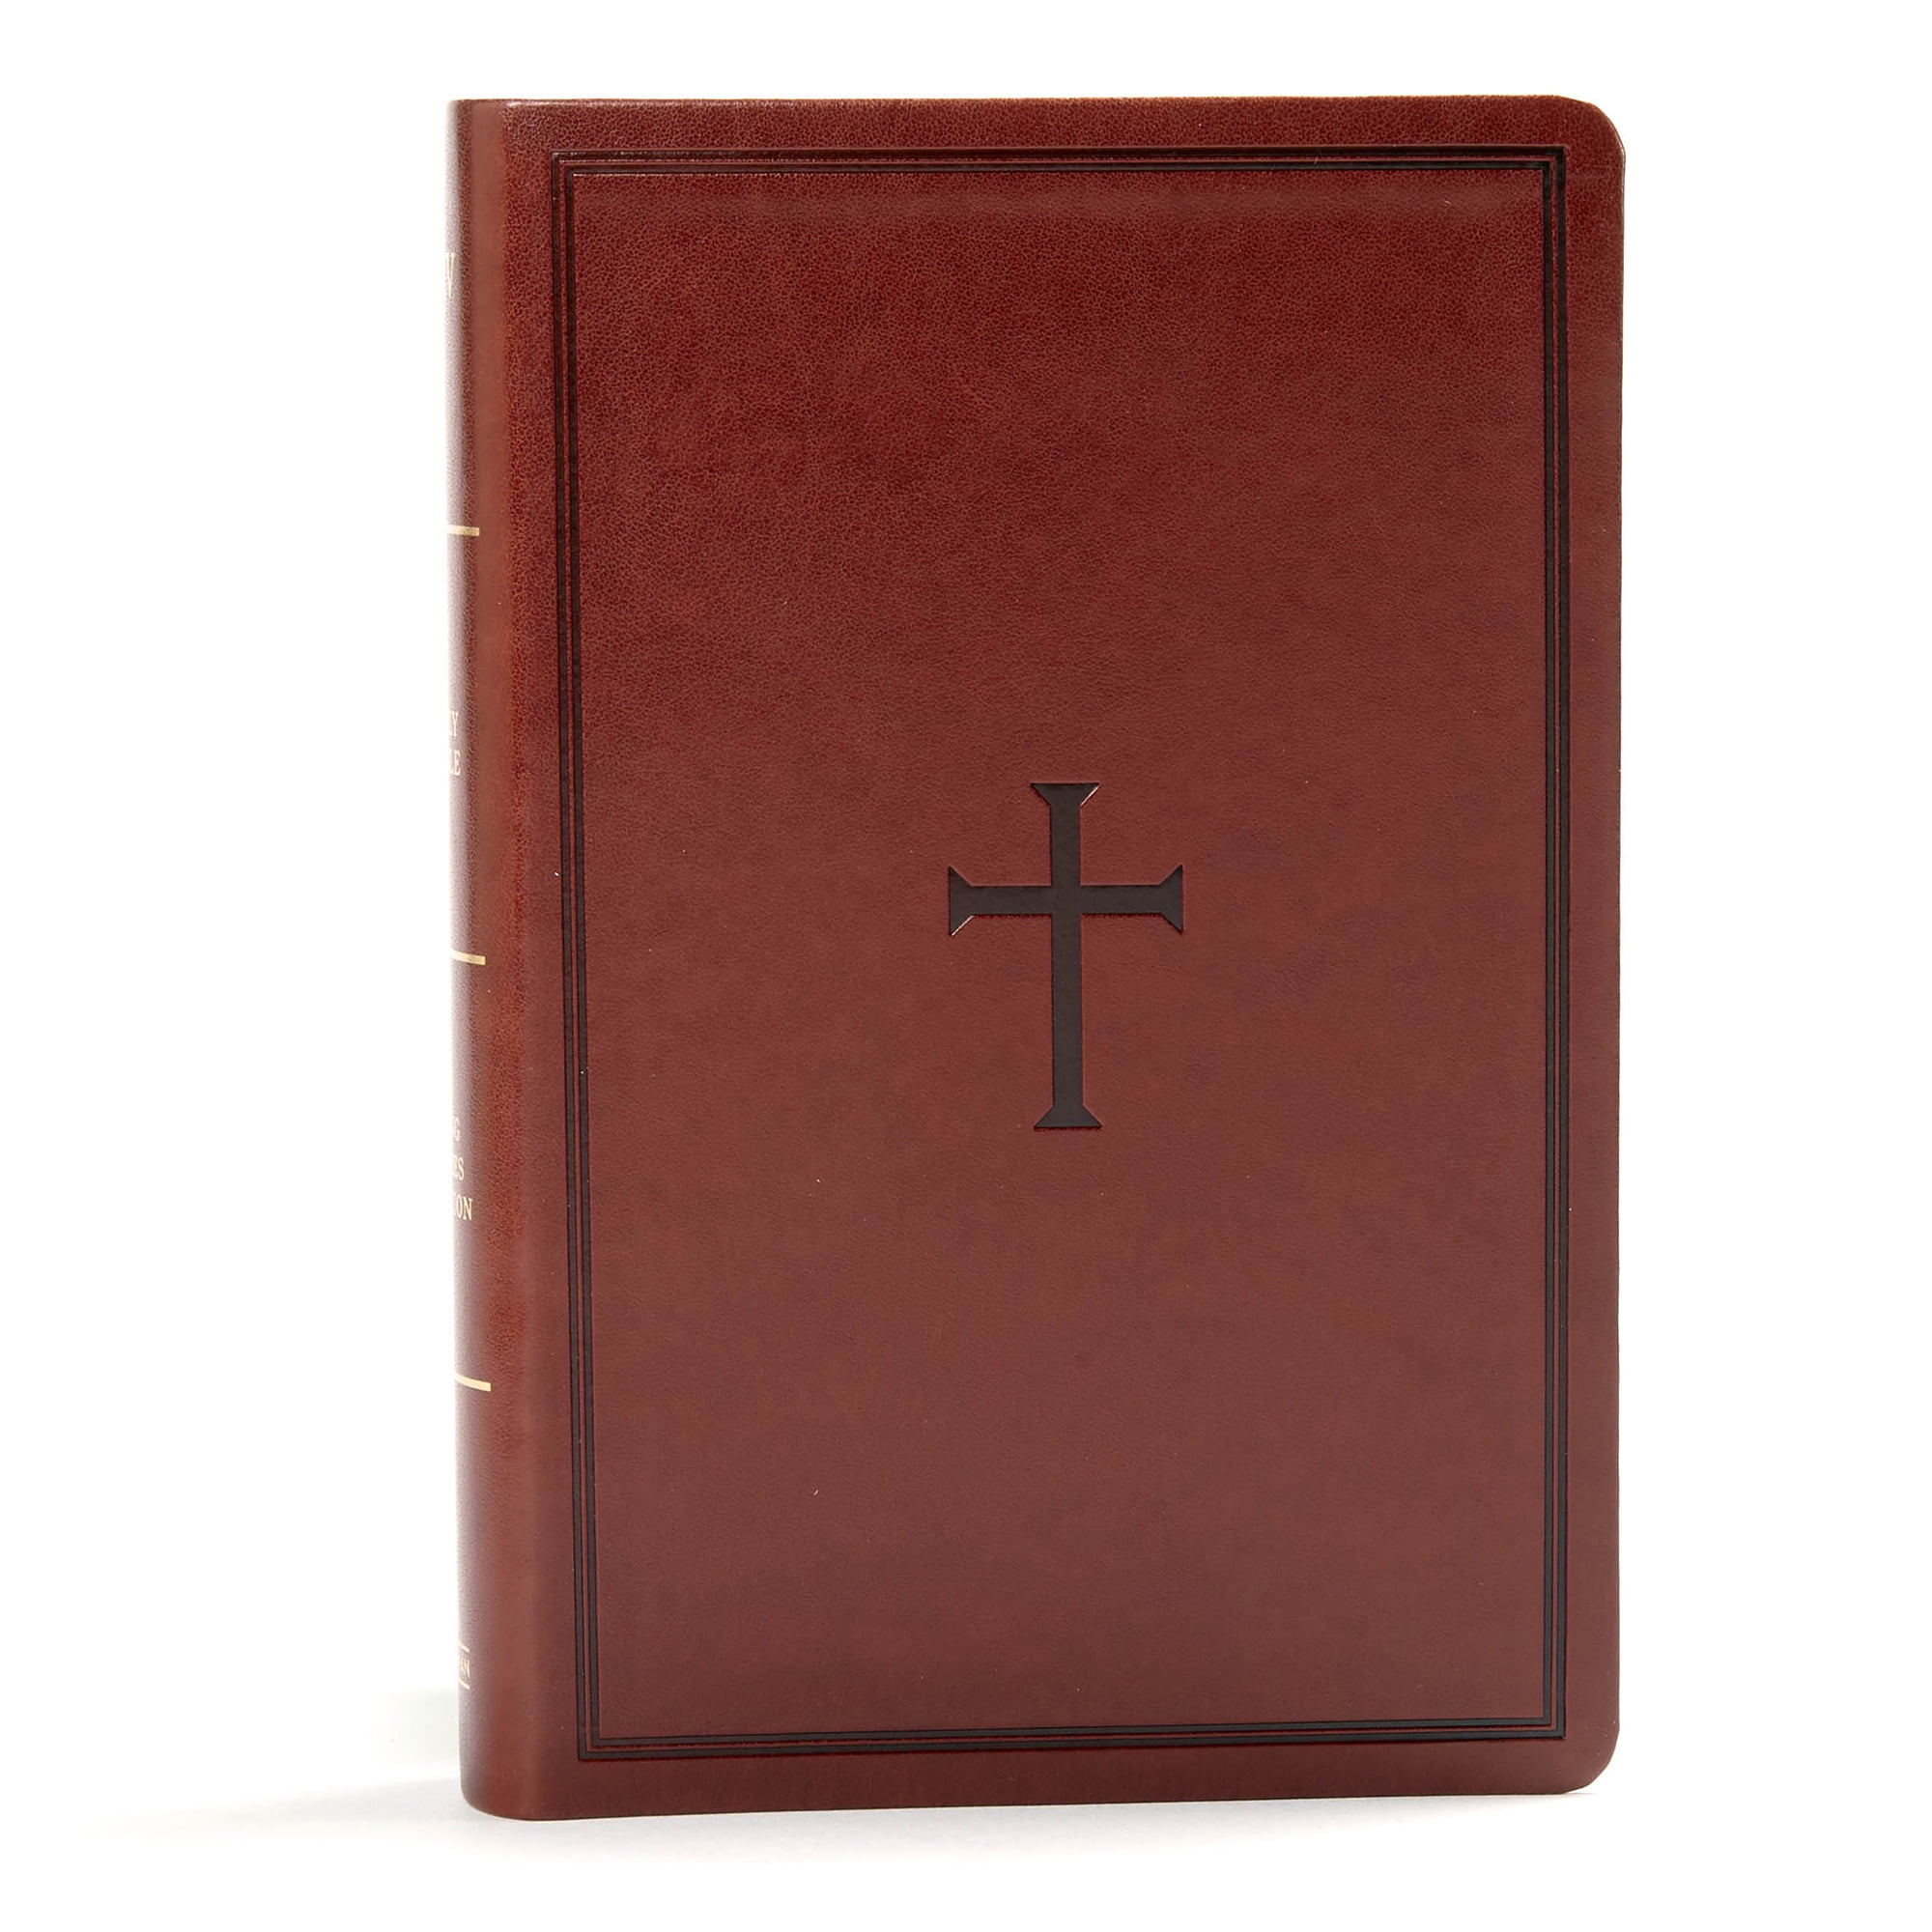 kjv-large-print-personal-size-reference-bible-brown-leathertouch